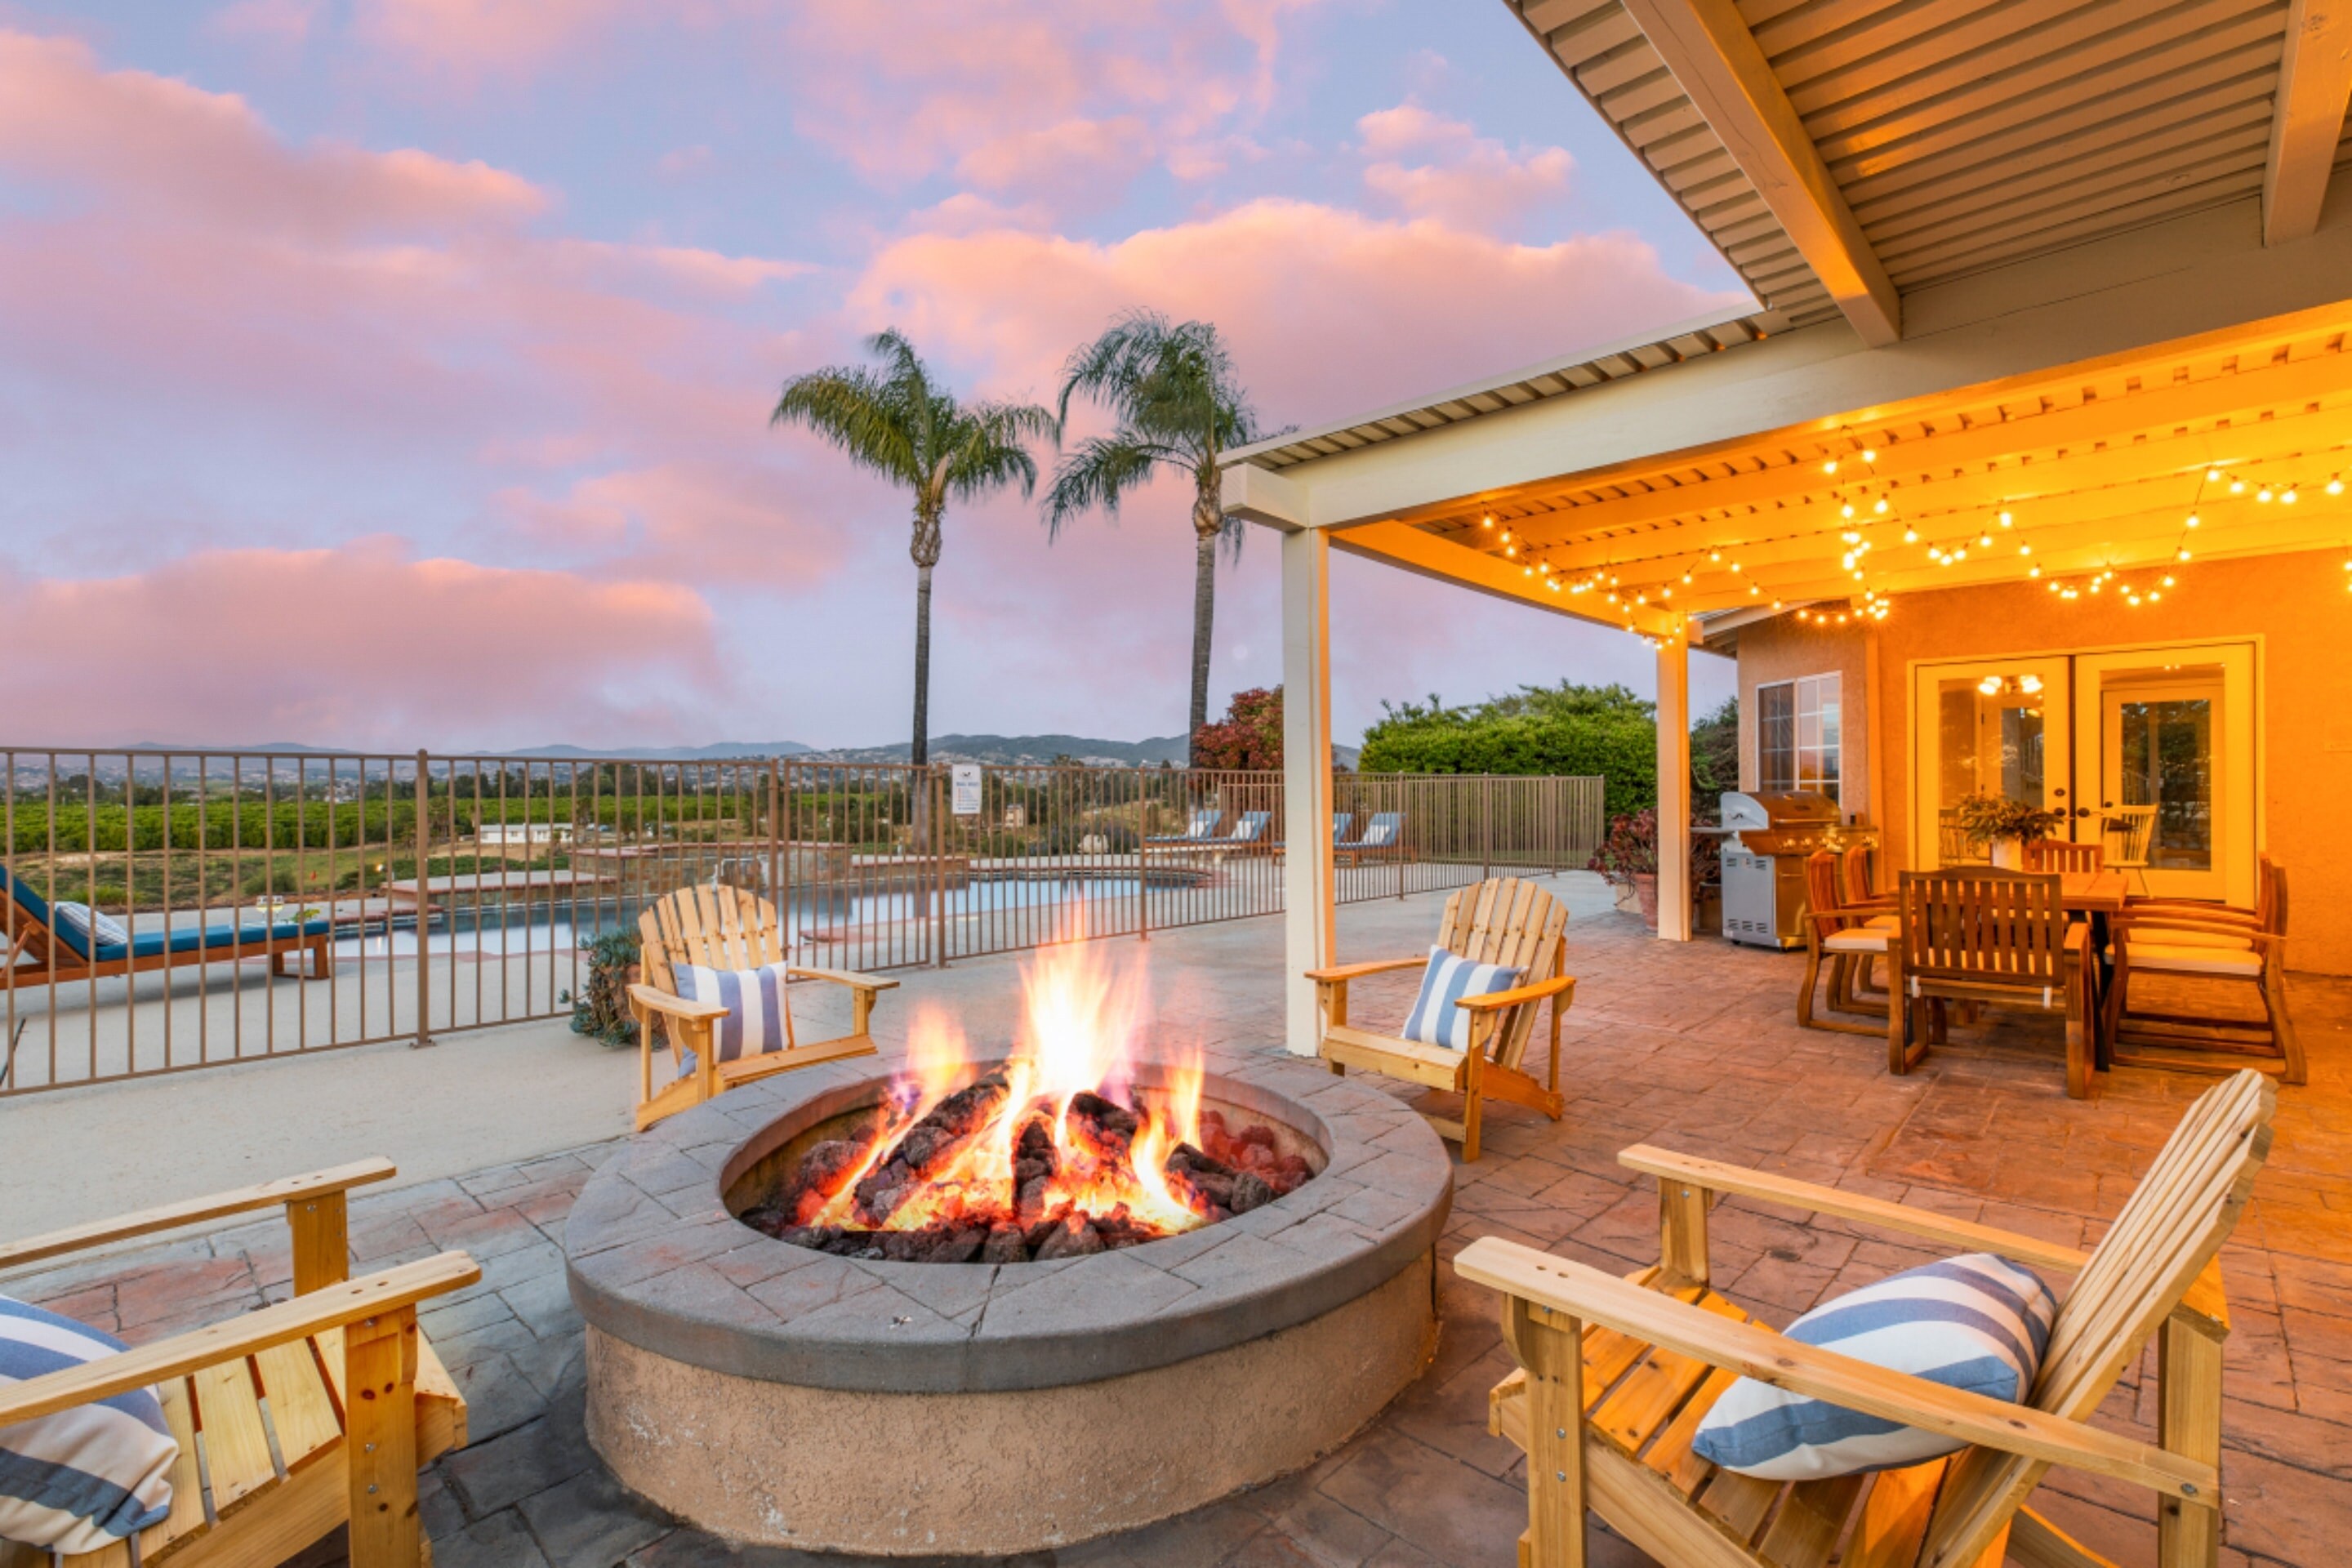 Gather around by the fire pit.